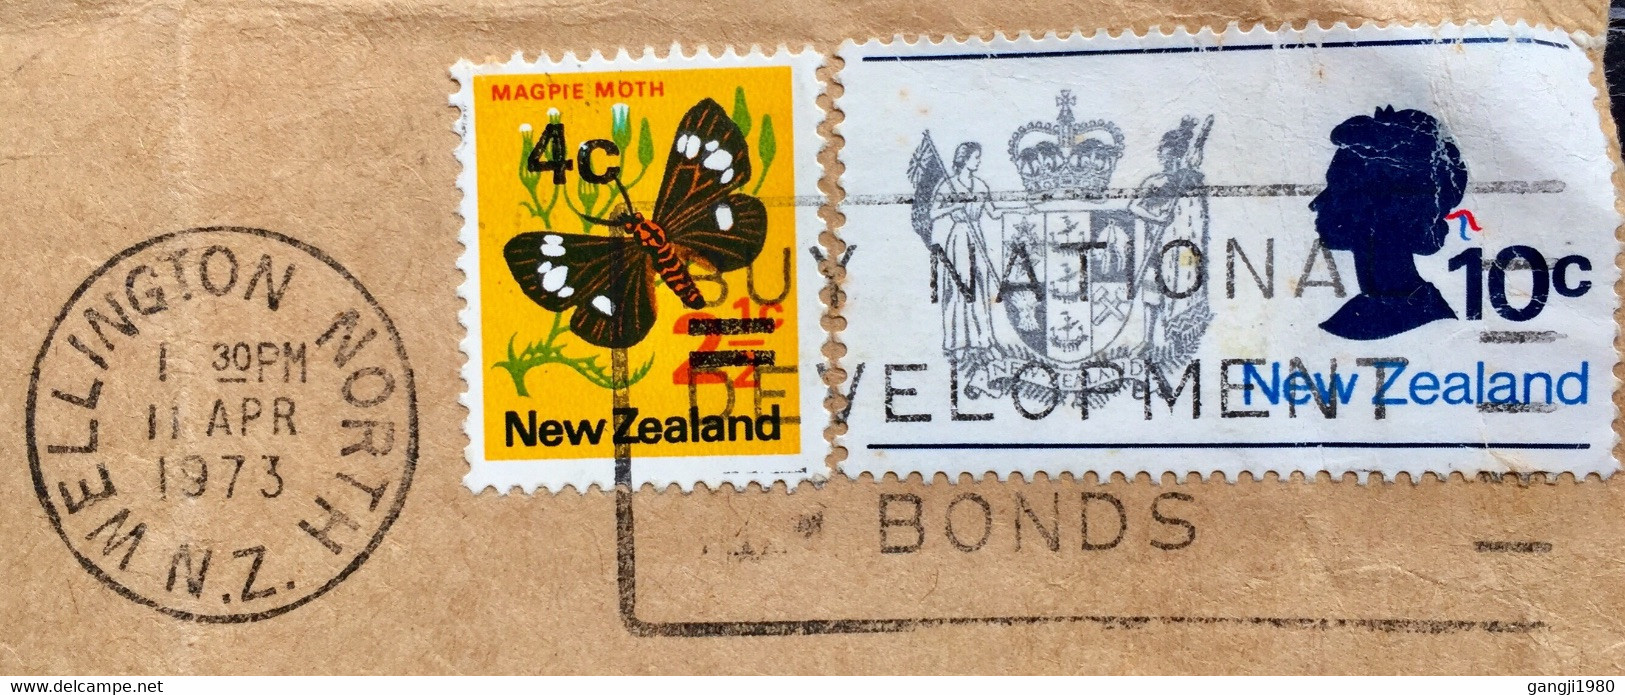 NEW ZEALAND 1973 ,BUY NATIONAL DEVELOPMENT BONDS SLOGAN,EMBASSY OF INDONESIA,USED COVER BUTTERFLY,EAGLE,QUEEN - Briefe U. Dokumente